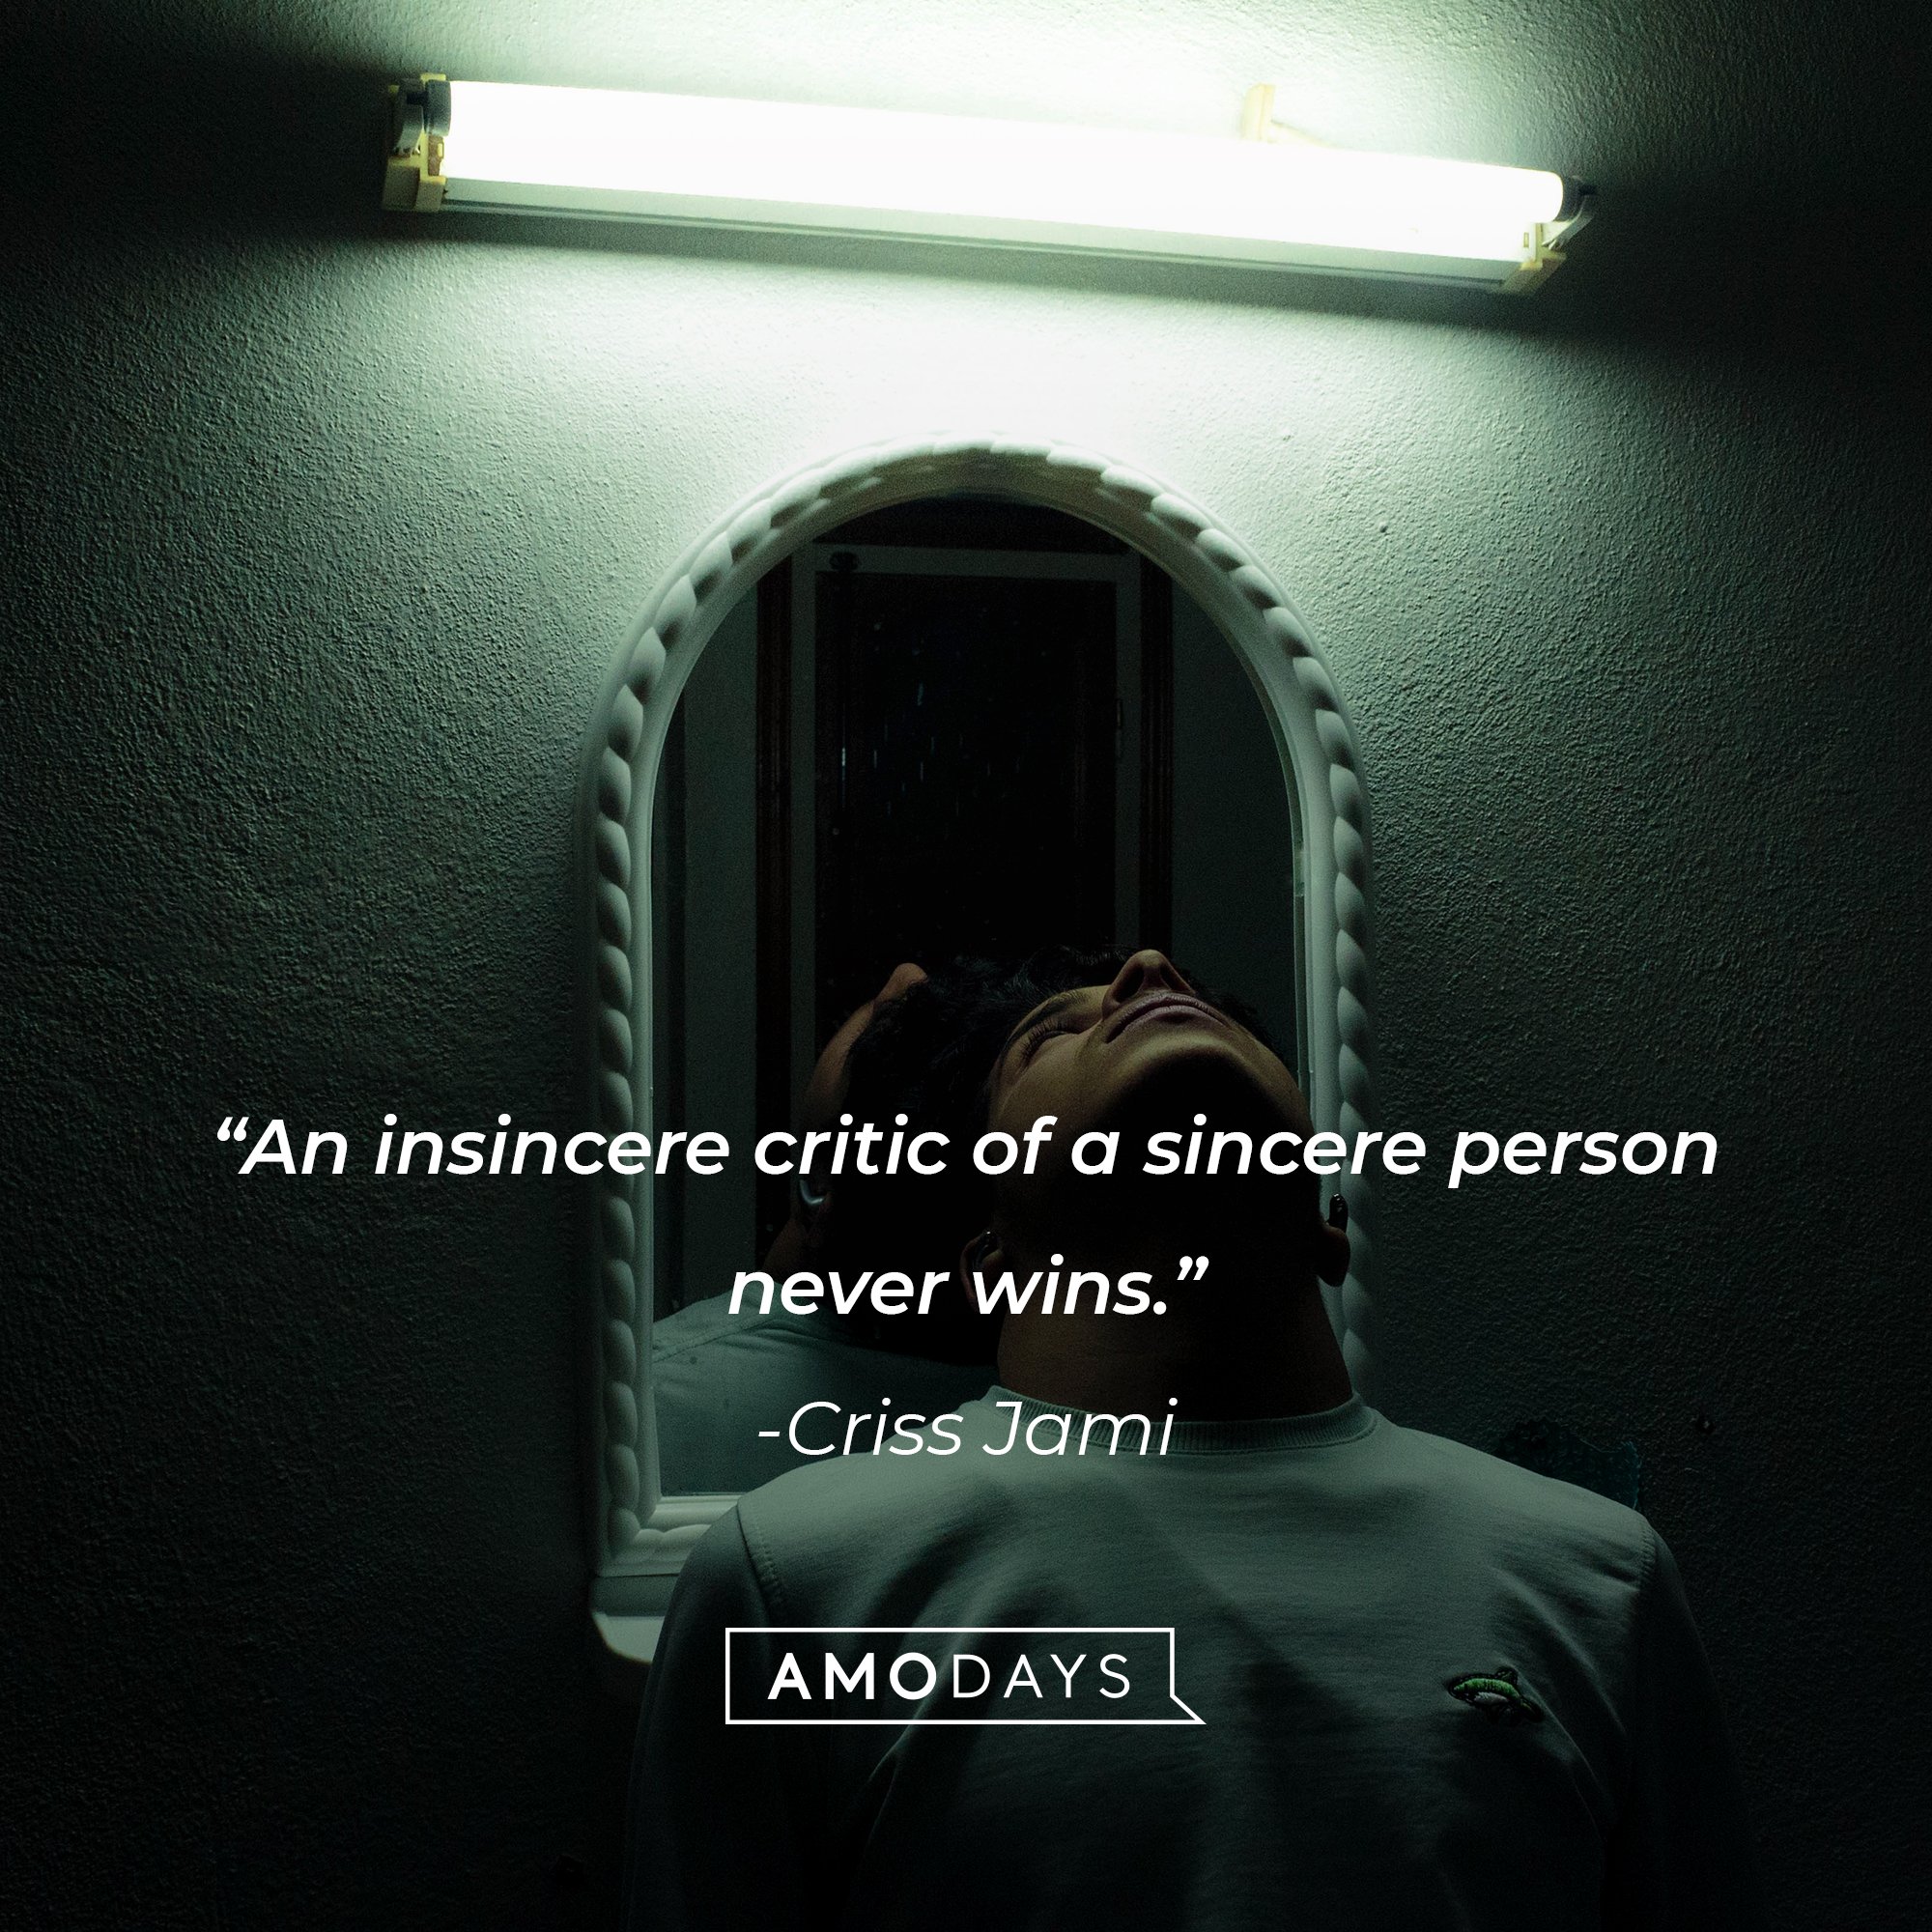 Criss Jami’s quote: “An insincere critic of a sincere person never wins.” | Image: Amodays  